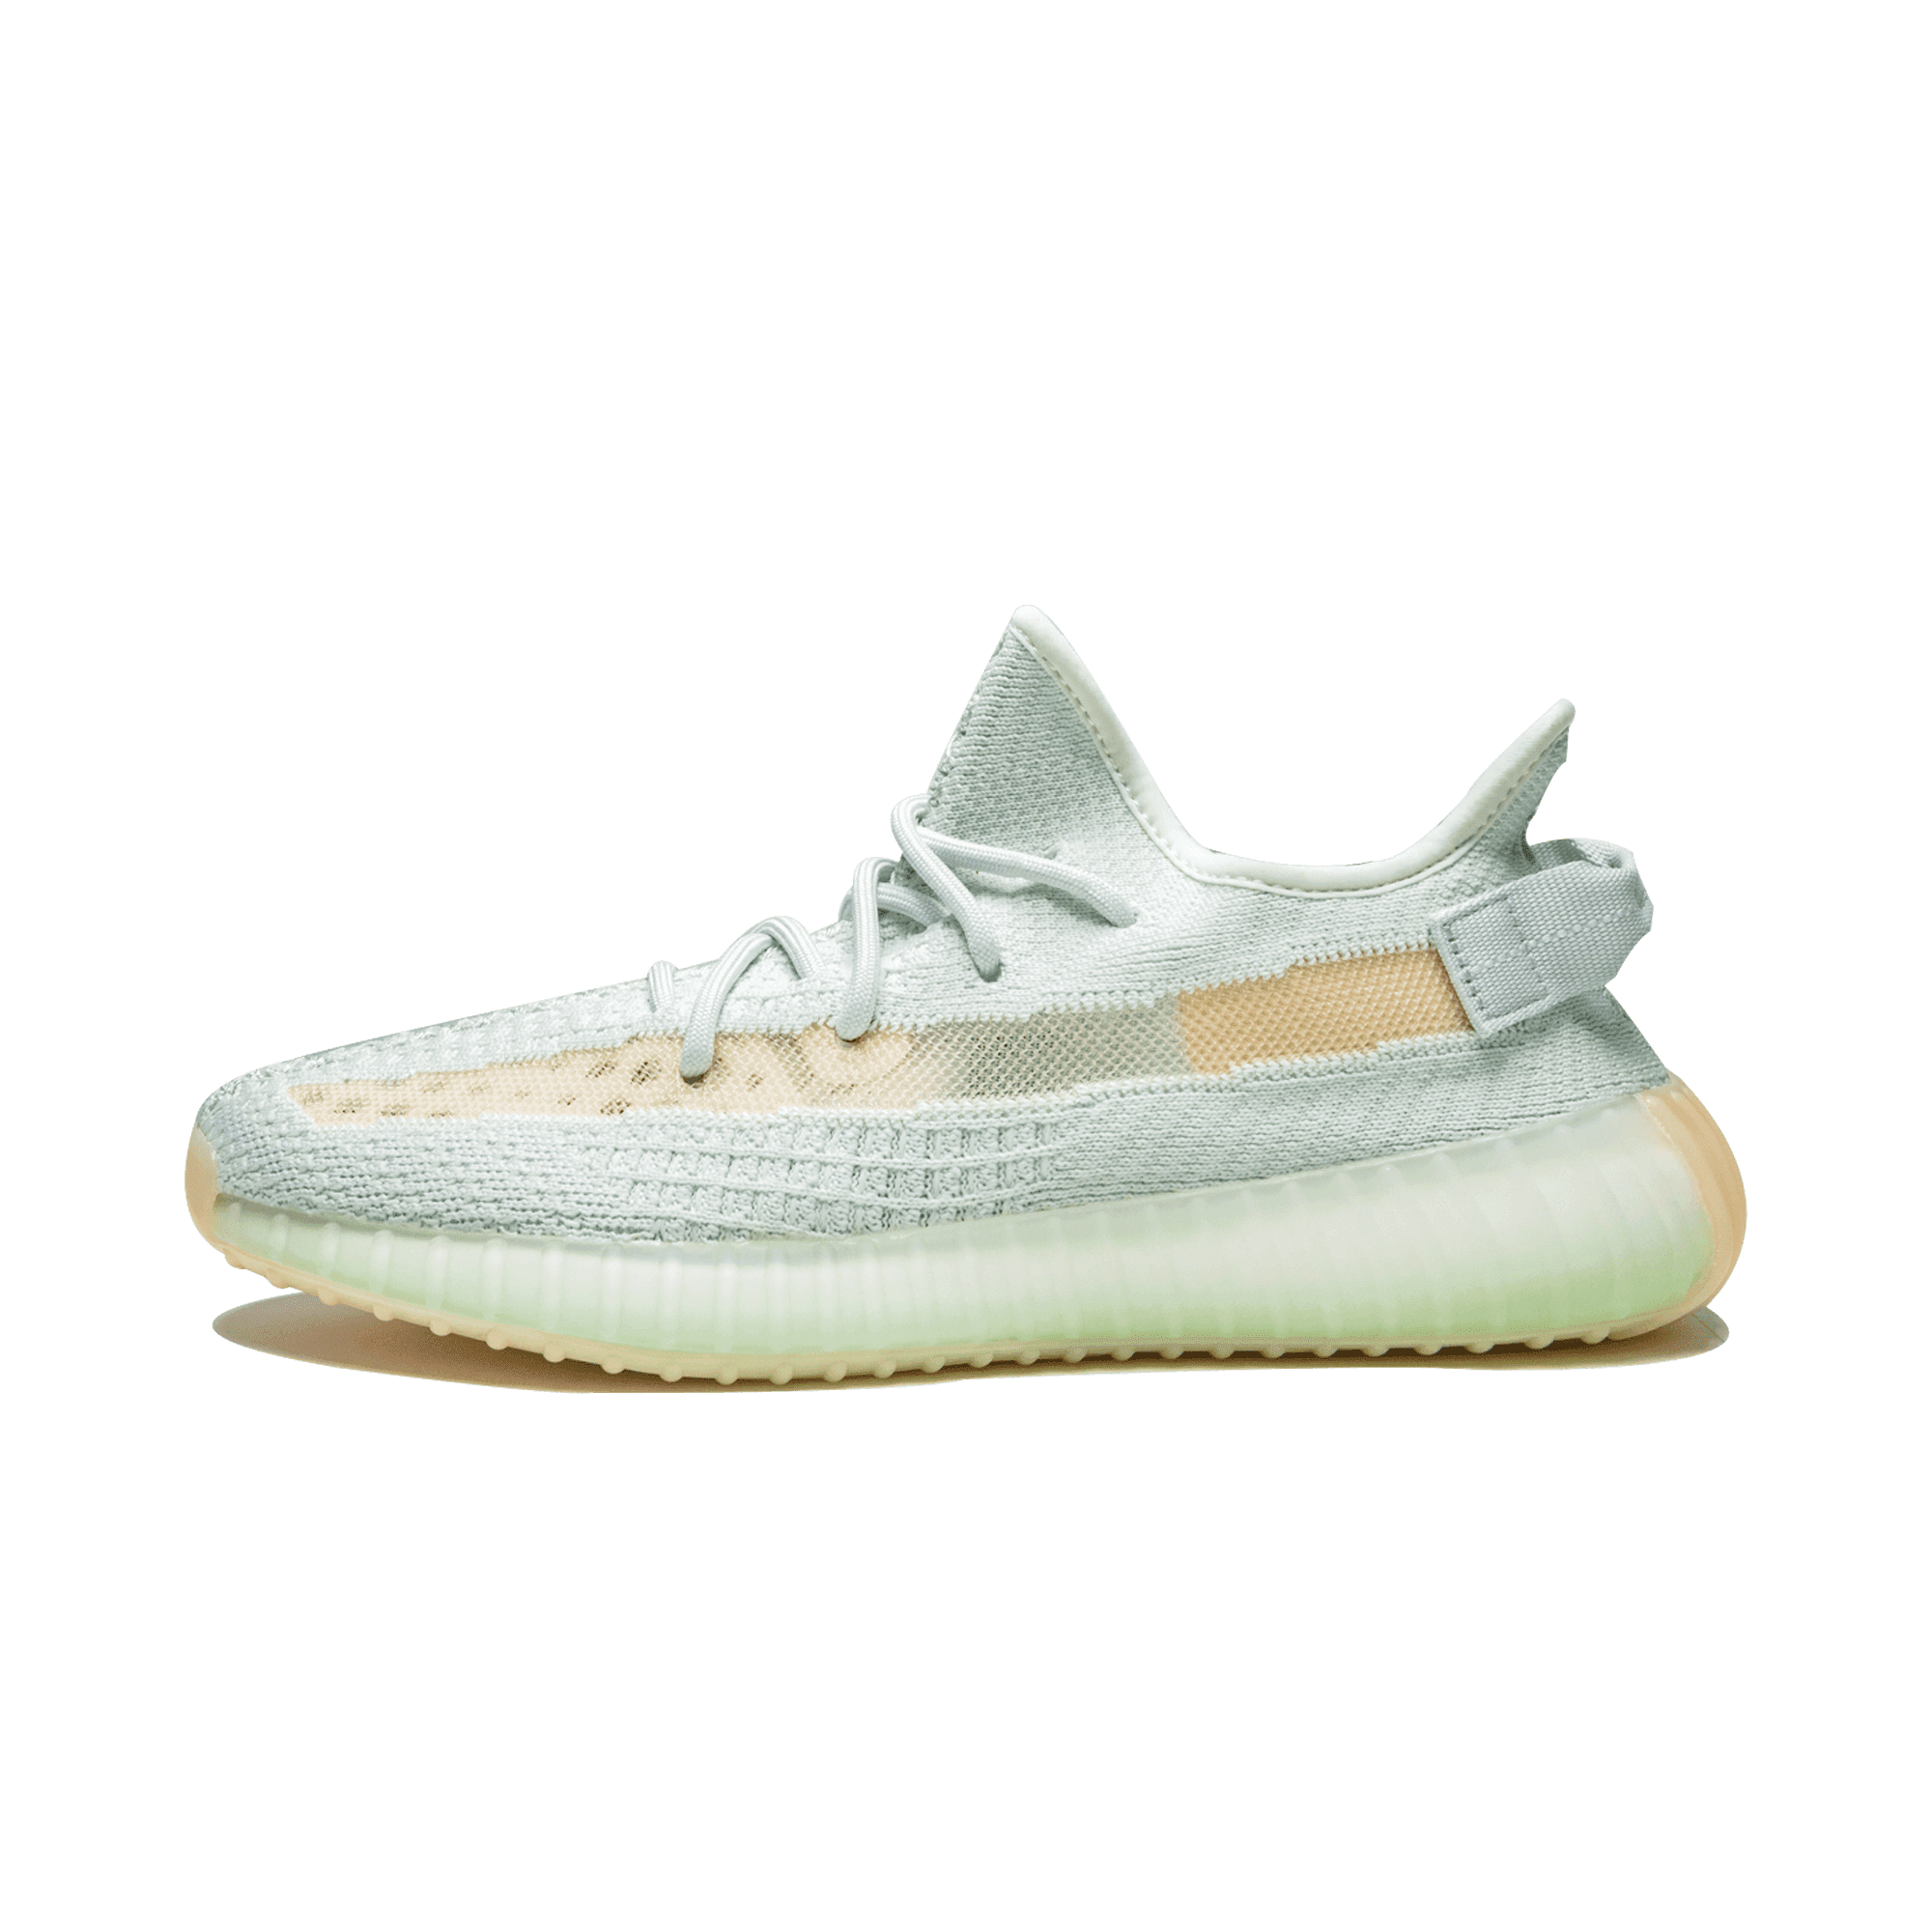 YEEZY BOOST 350 V2 "Hyperspace" (4014271168584)